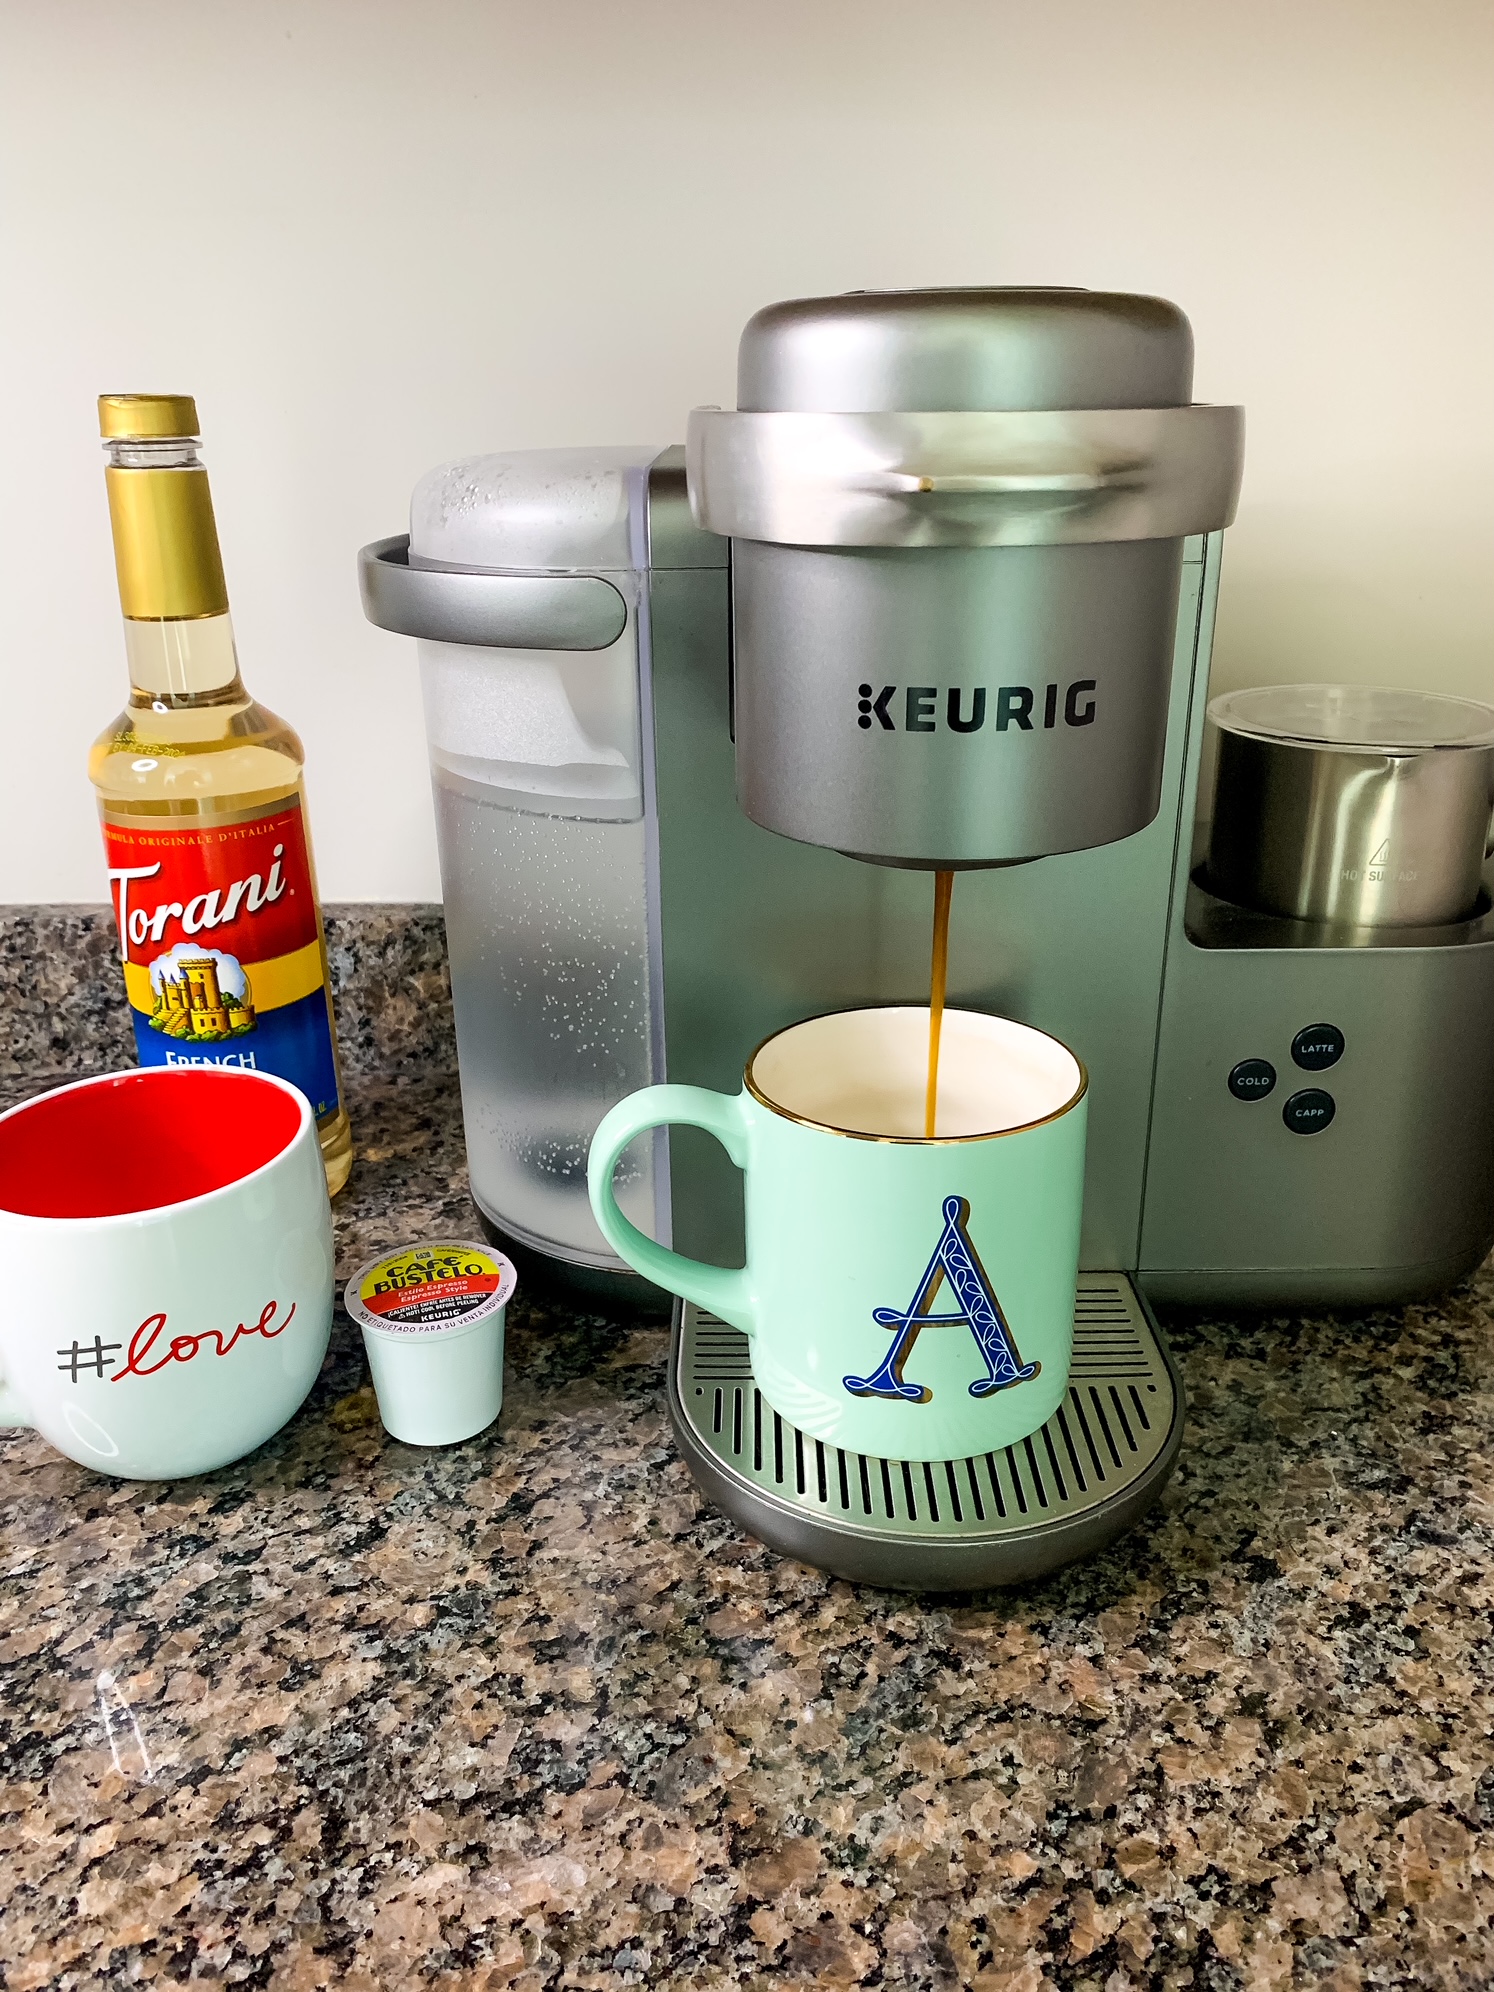 Keurig K-Latte Single Serve Coffee Maker with Milk Frother - Uses